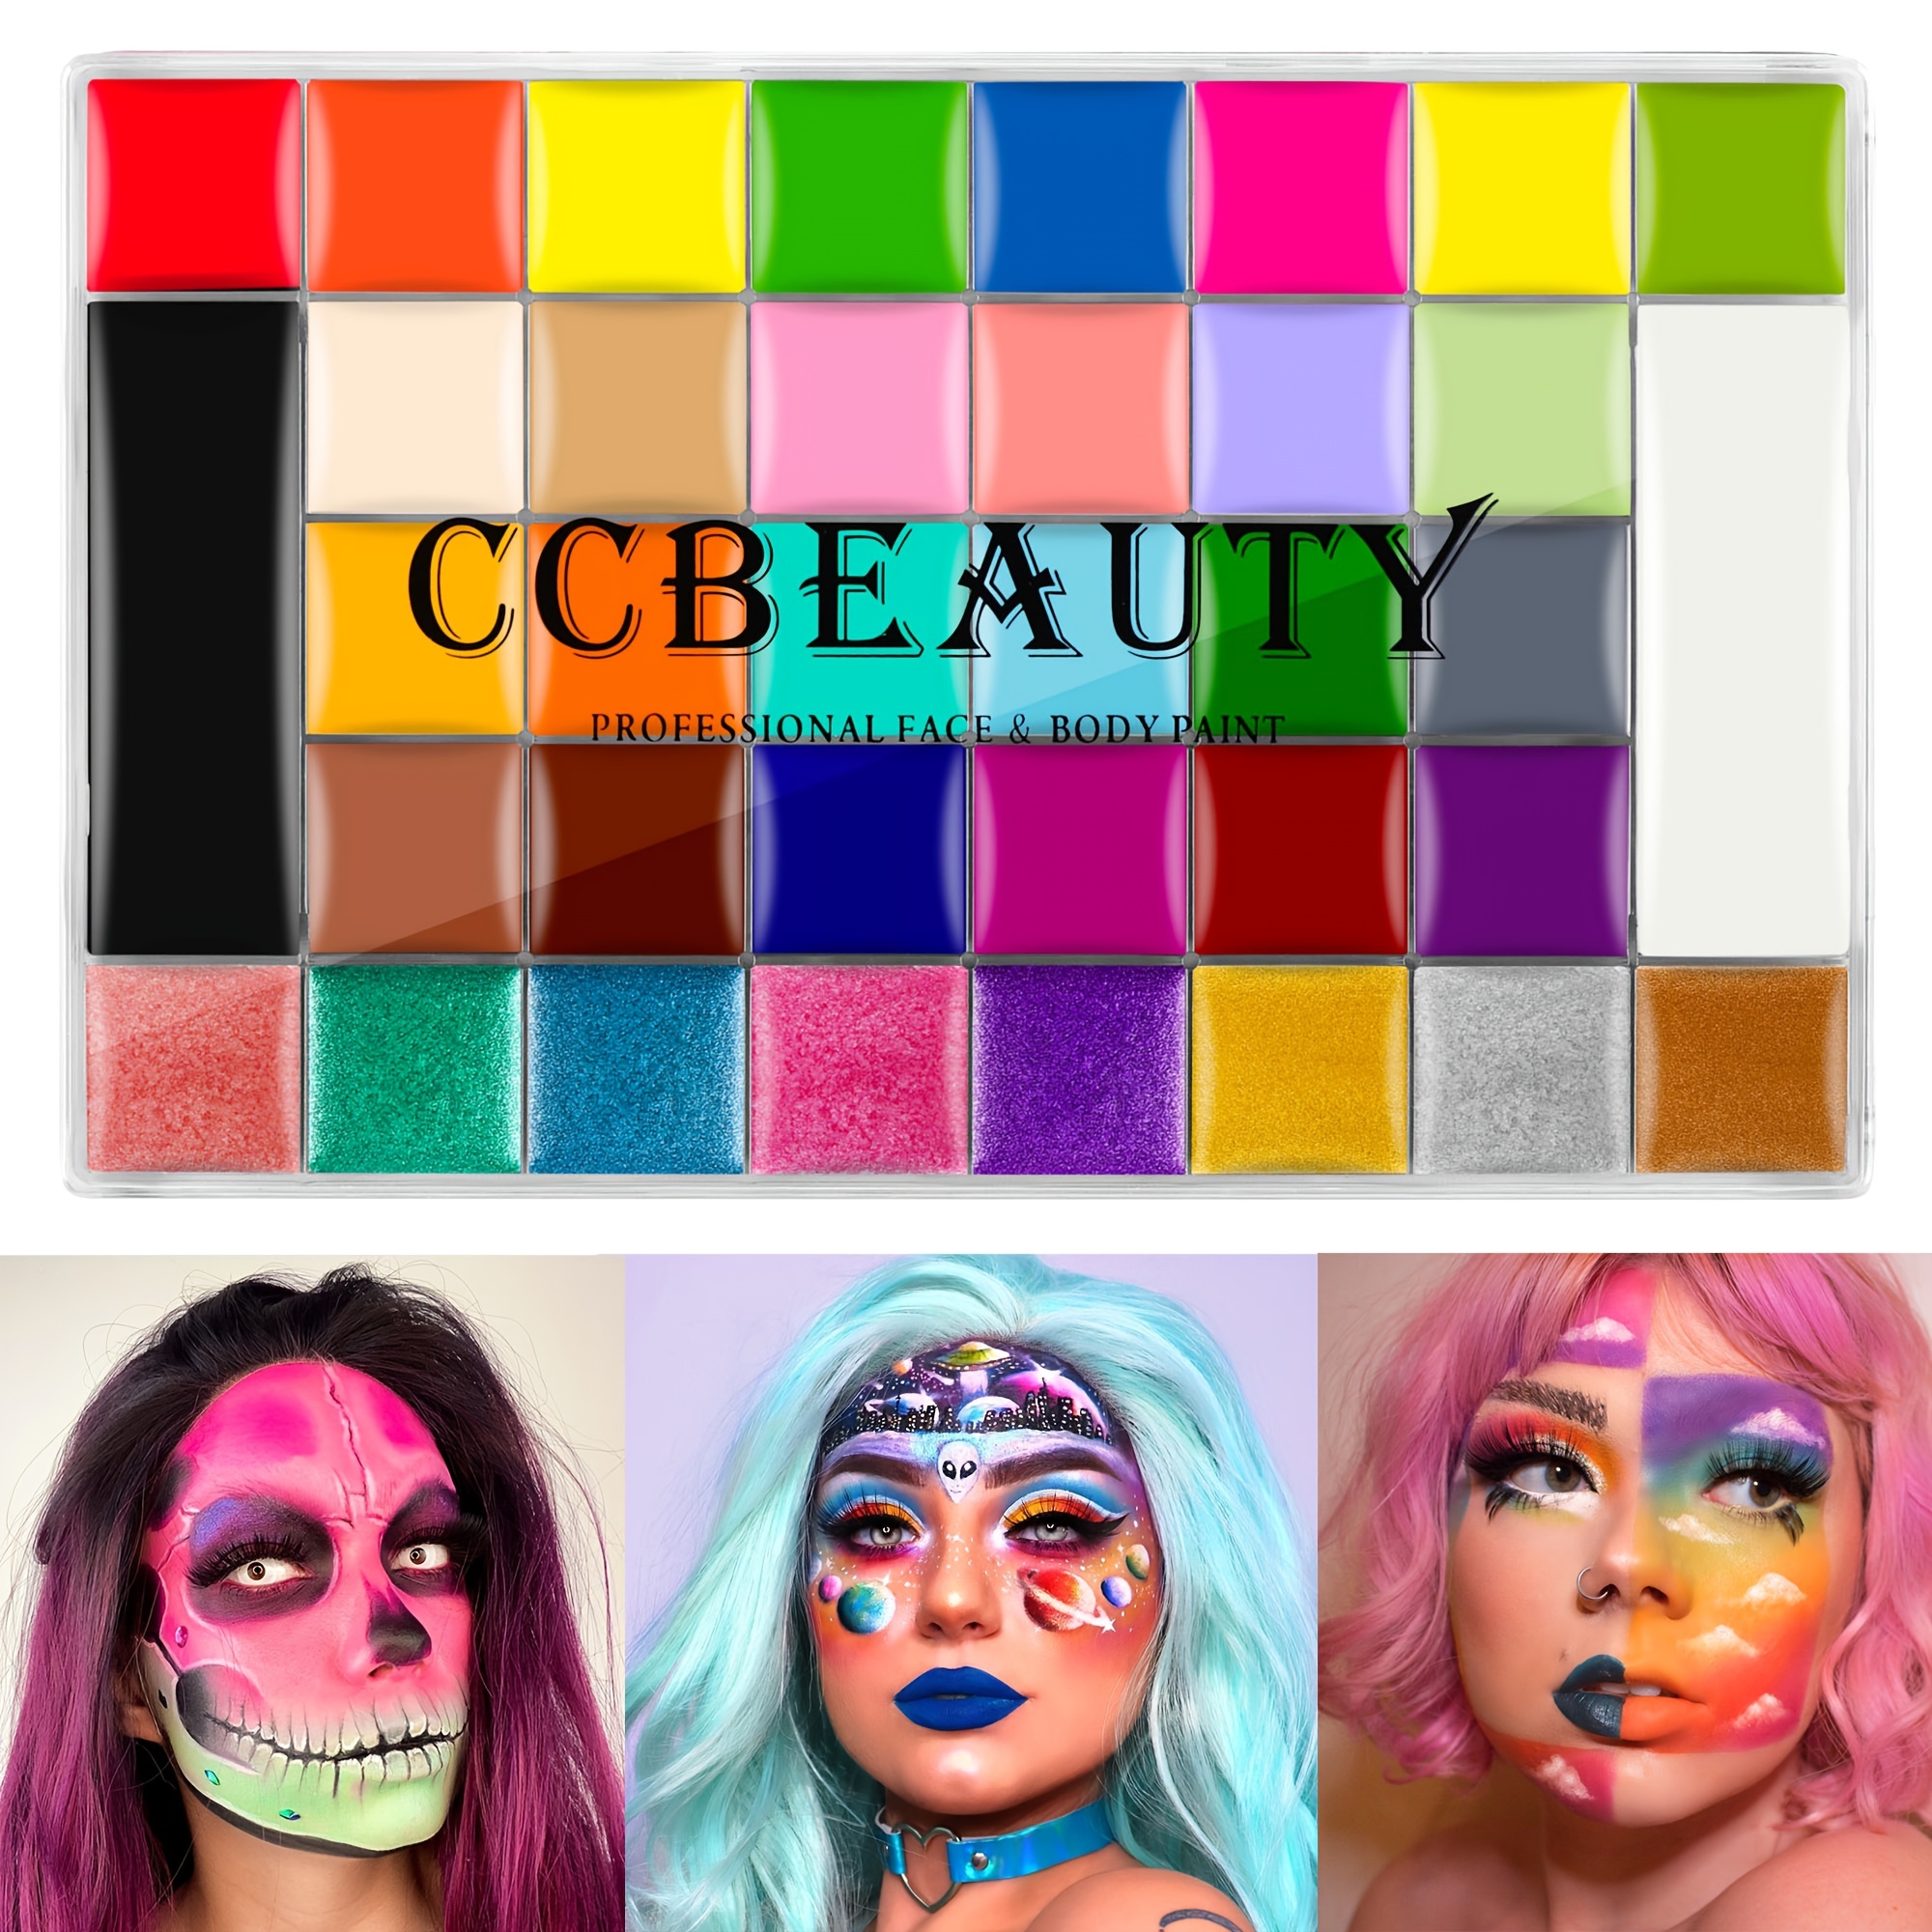  CCbeauty Professional 36 Colors Face Body Paint, Large Cream  Painting Palette Kit (8 Metallic + 6 UV Glow + 22 Matte Colors), Safe  FacePaint for Halloween SFX Special Effects Costume